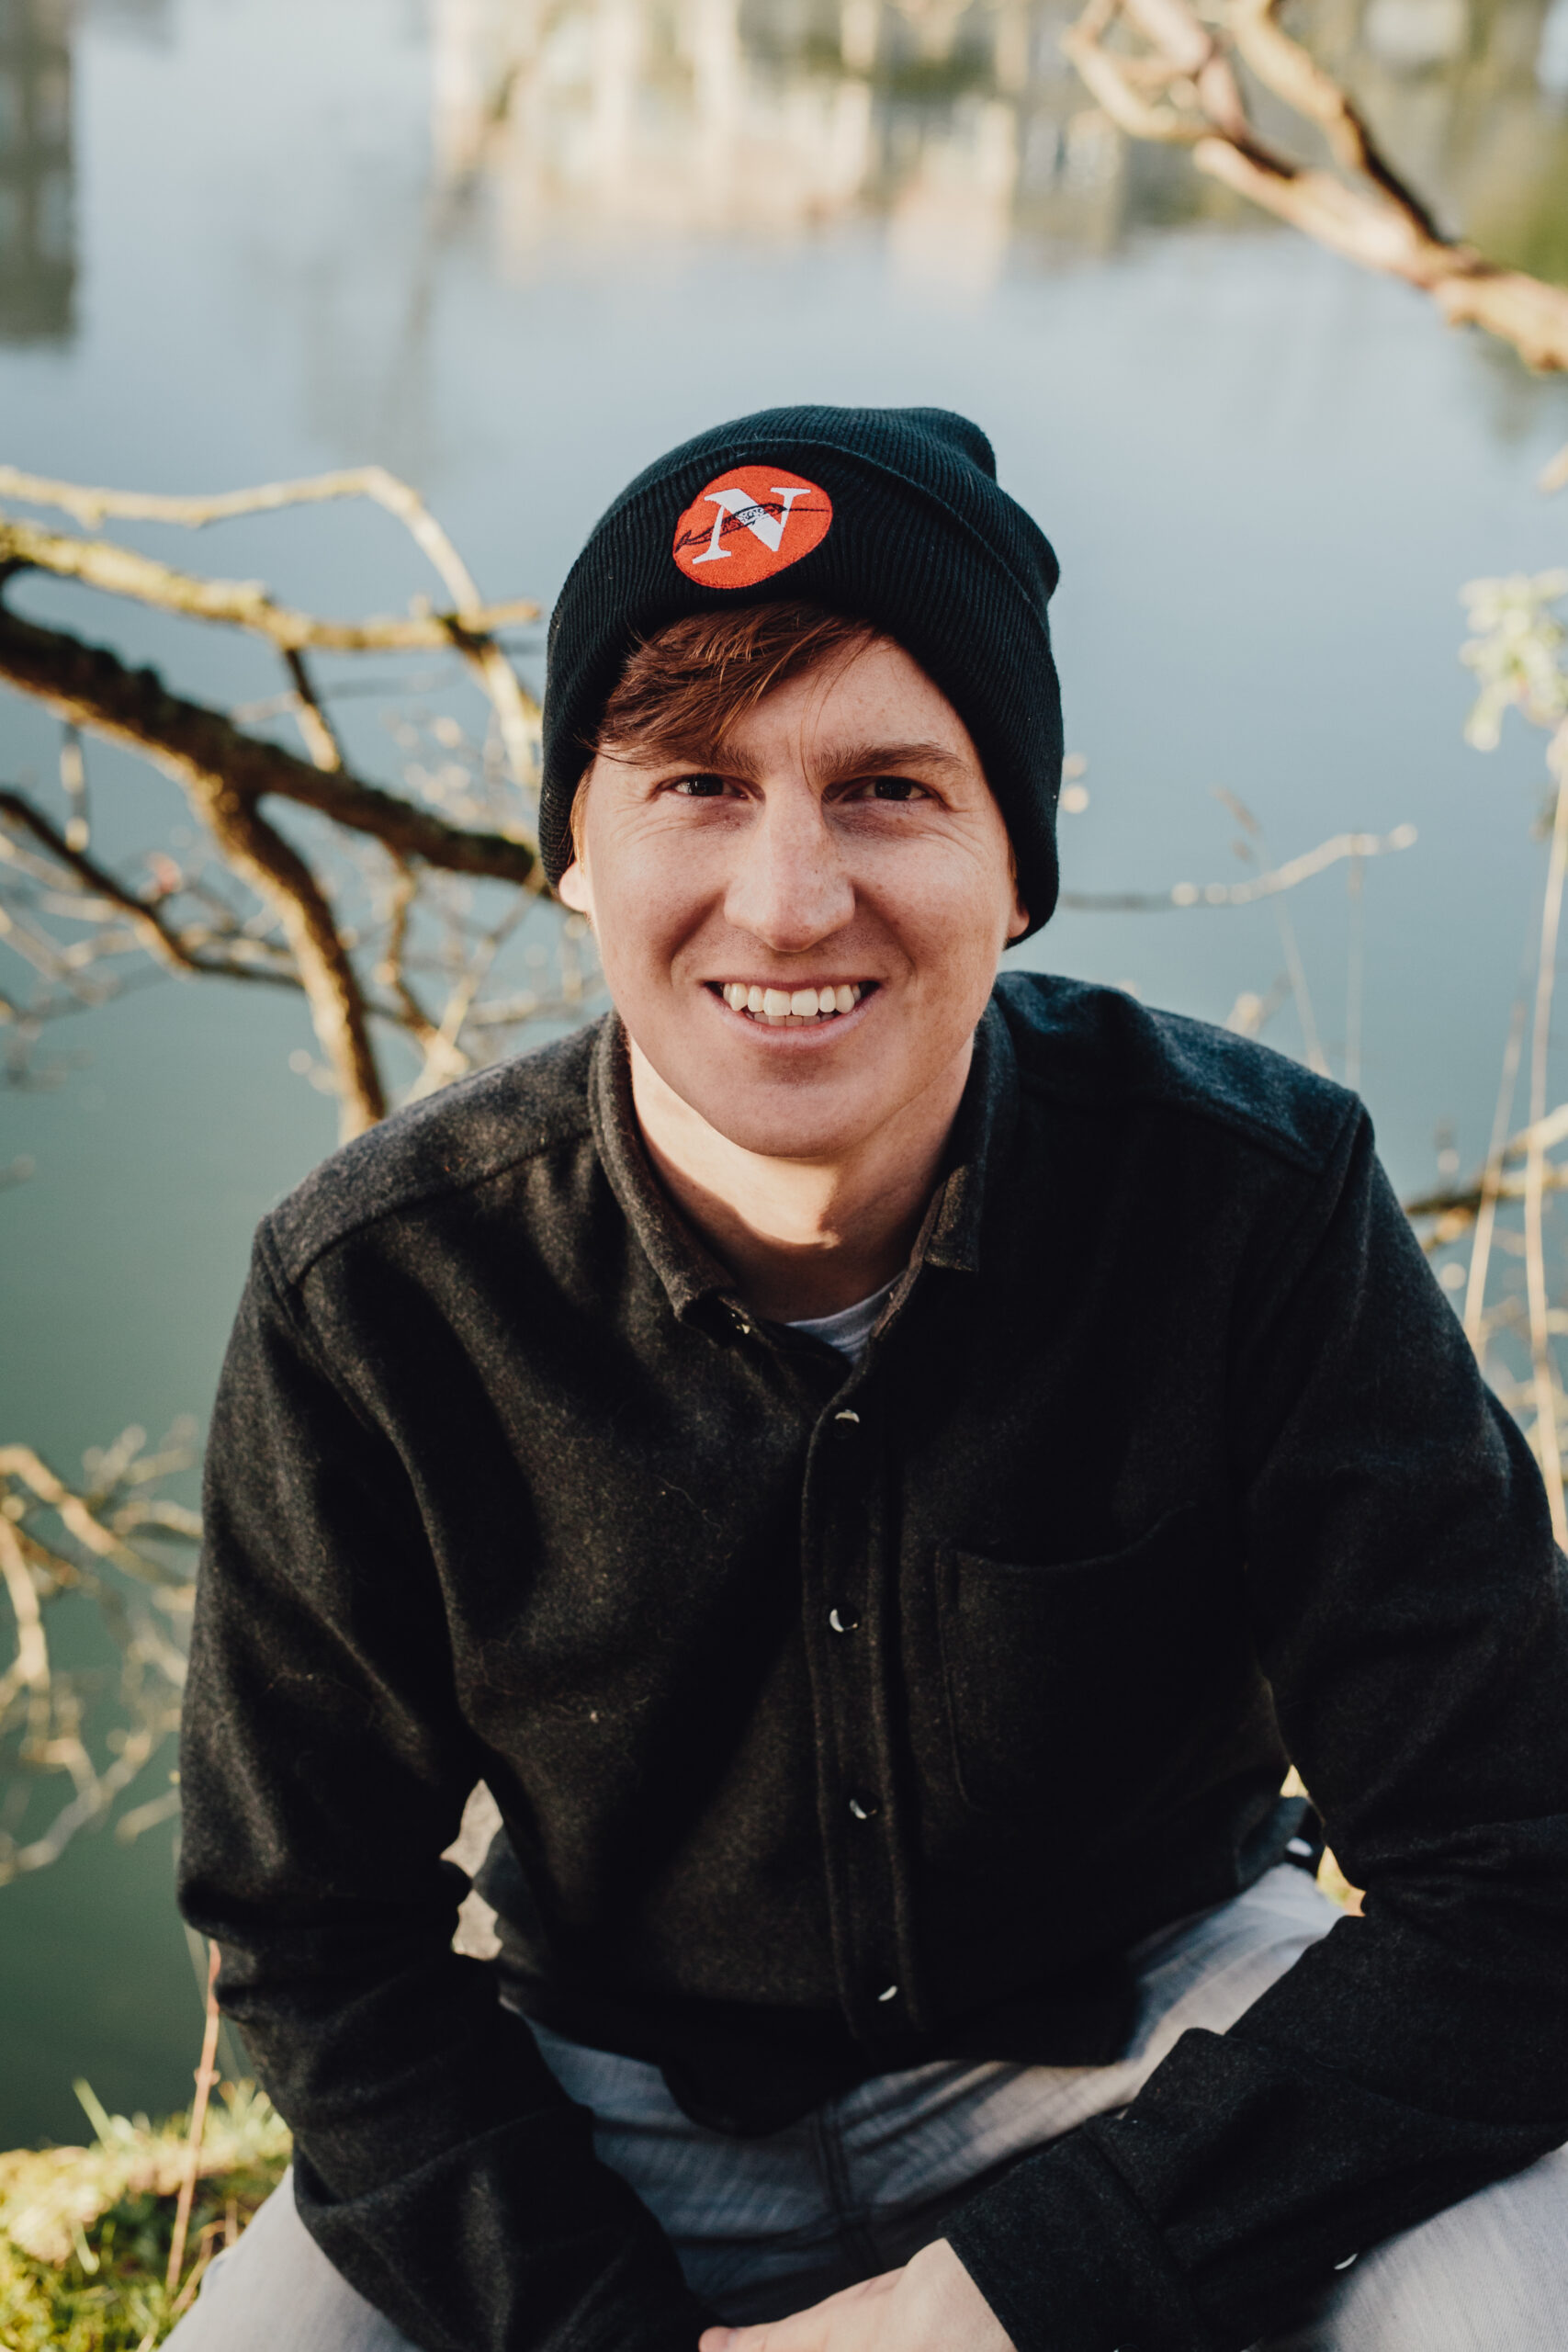 A photo of a man wearing a black toque with the red logo from The Narwhal